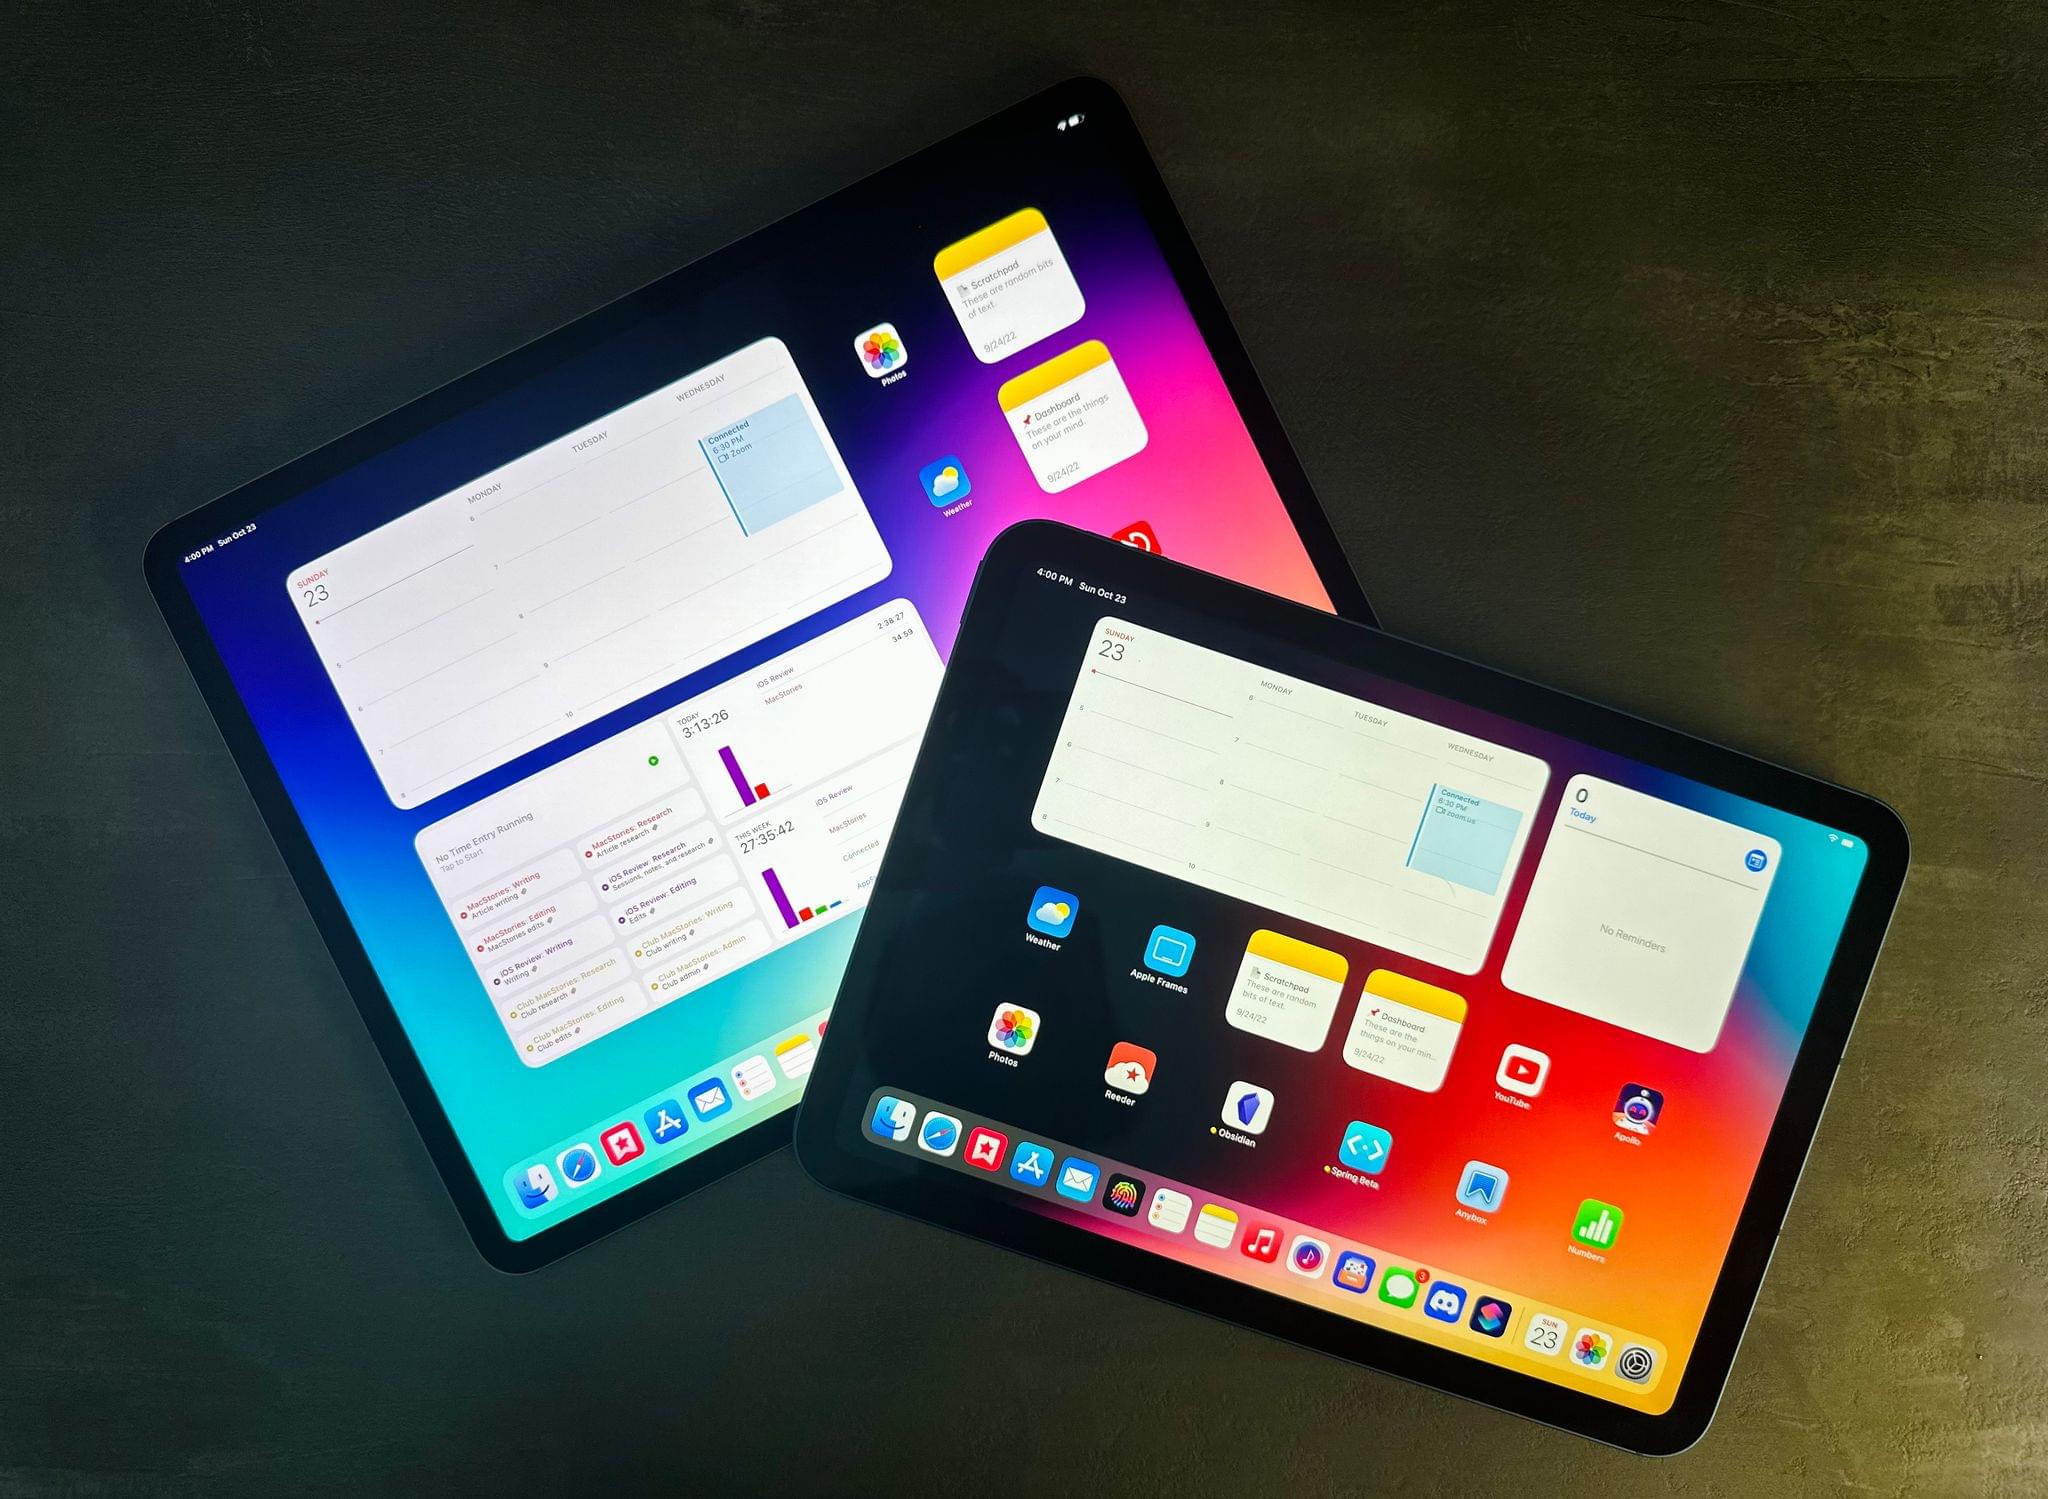 iPad Pro 2022 with M2 SoC, iPad 10th-Gen with new design launched